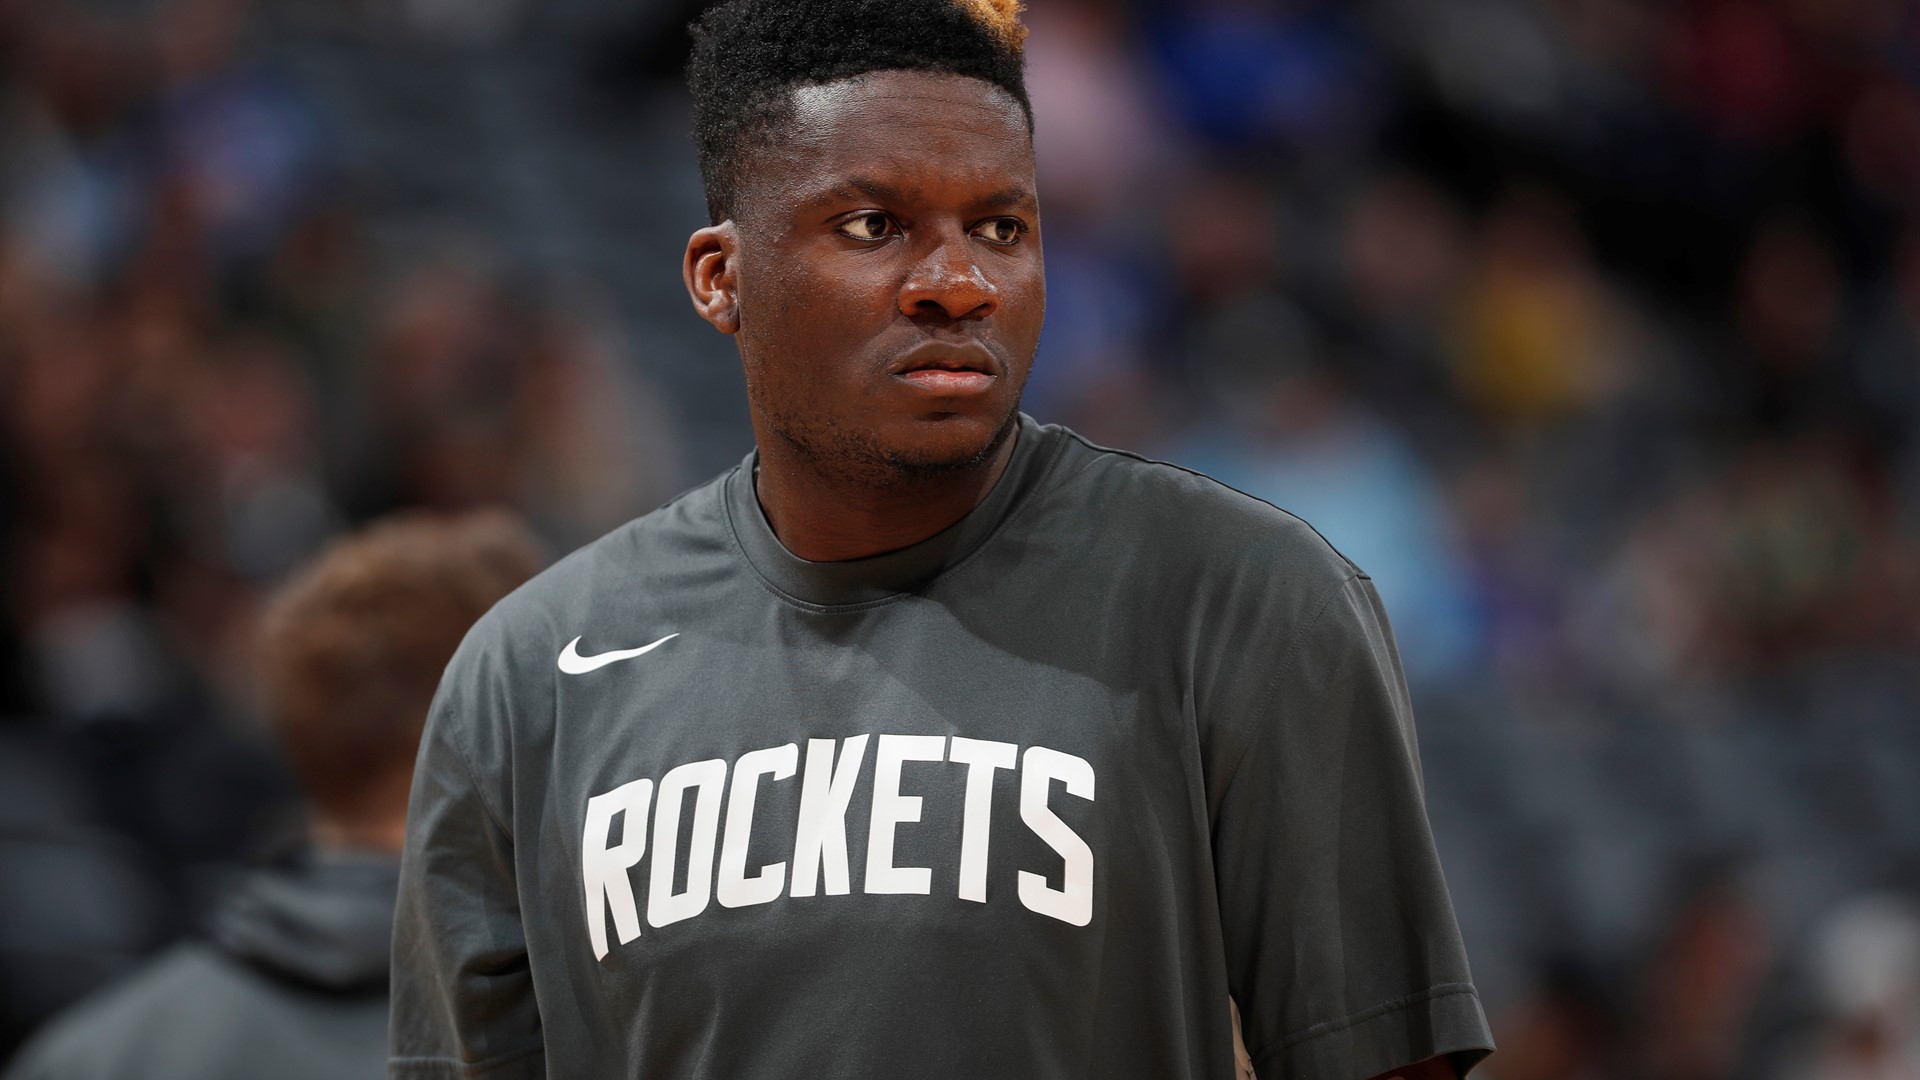 The Houston Rockets are parting ways with center Clint Capela and acquired forwards Robert Covington and Jordan Bell as part of a four-team mega-deal.